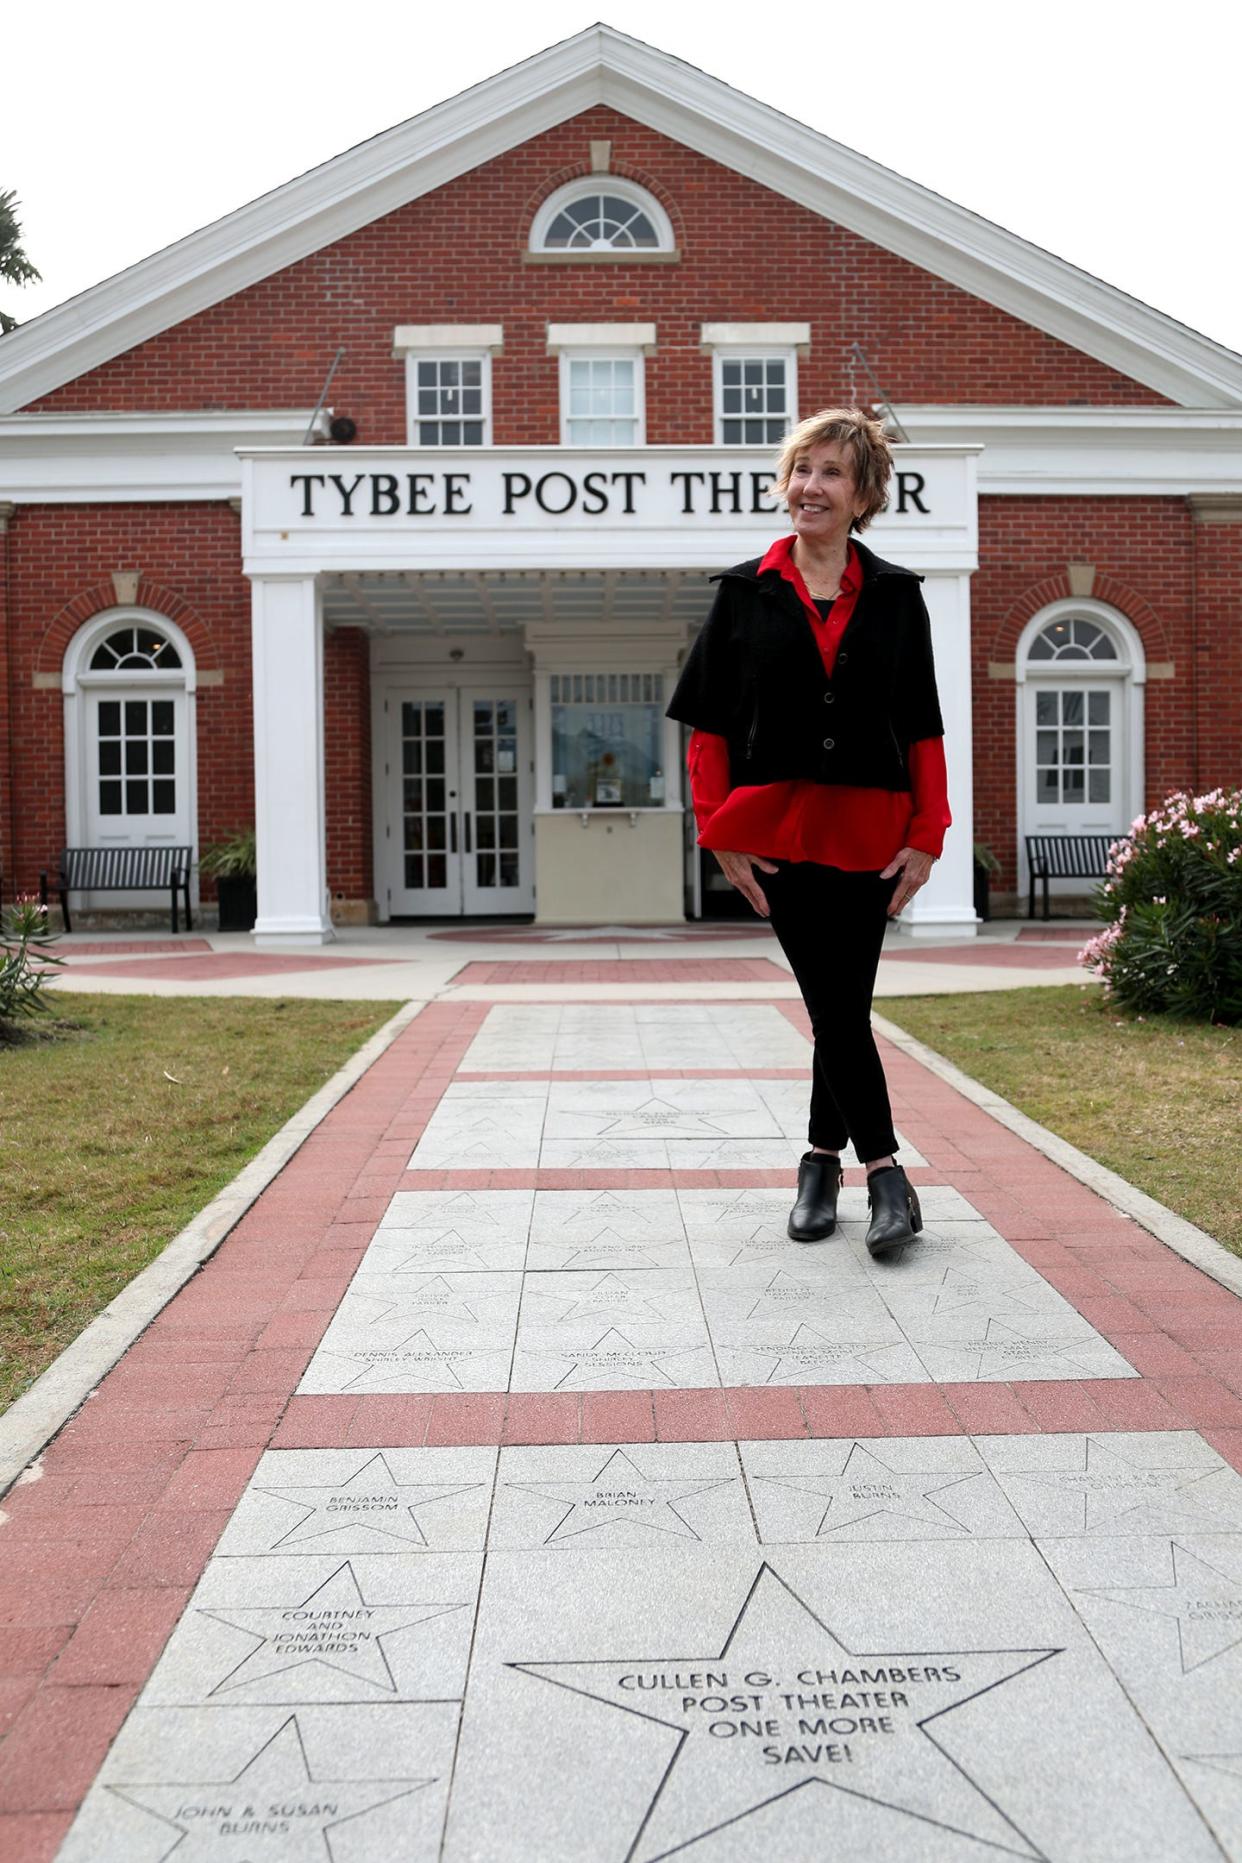 Tybee Mayor Shirley Sessions, served four terms on Tybee City Council before being elected the first female mayor for the Island in 2020. Helping to save the Tybee Post Theater is one of the things she is most proud of during her years of public service to Tybee Island.